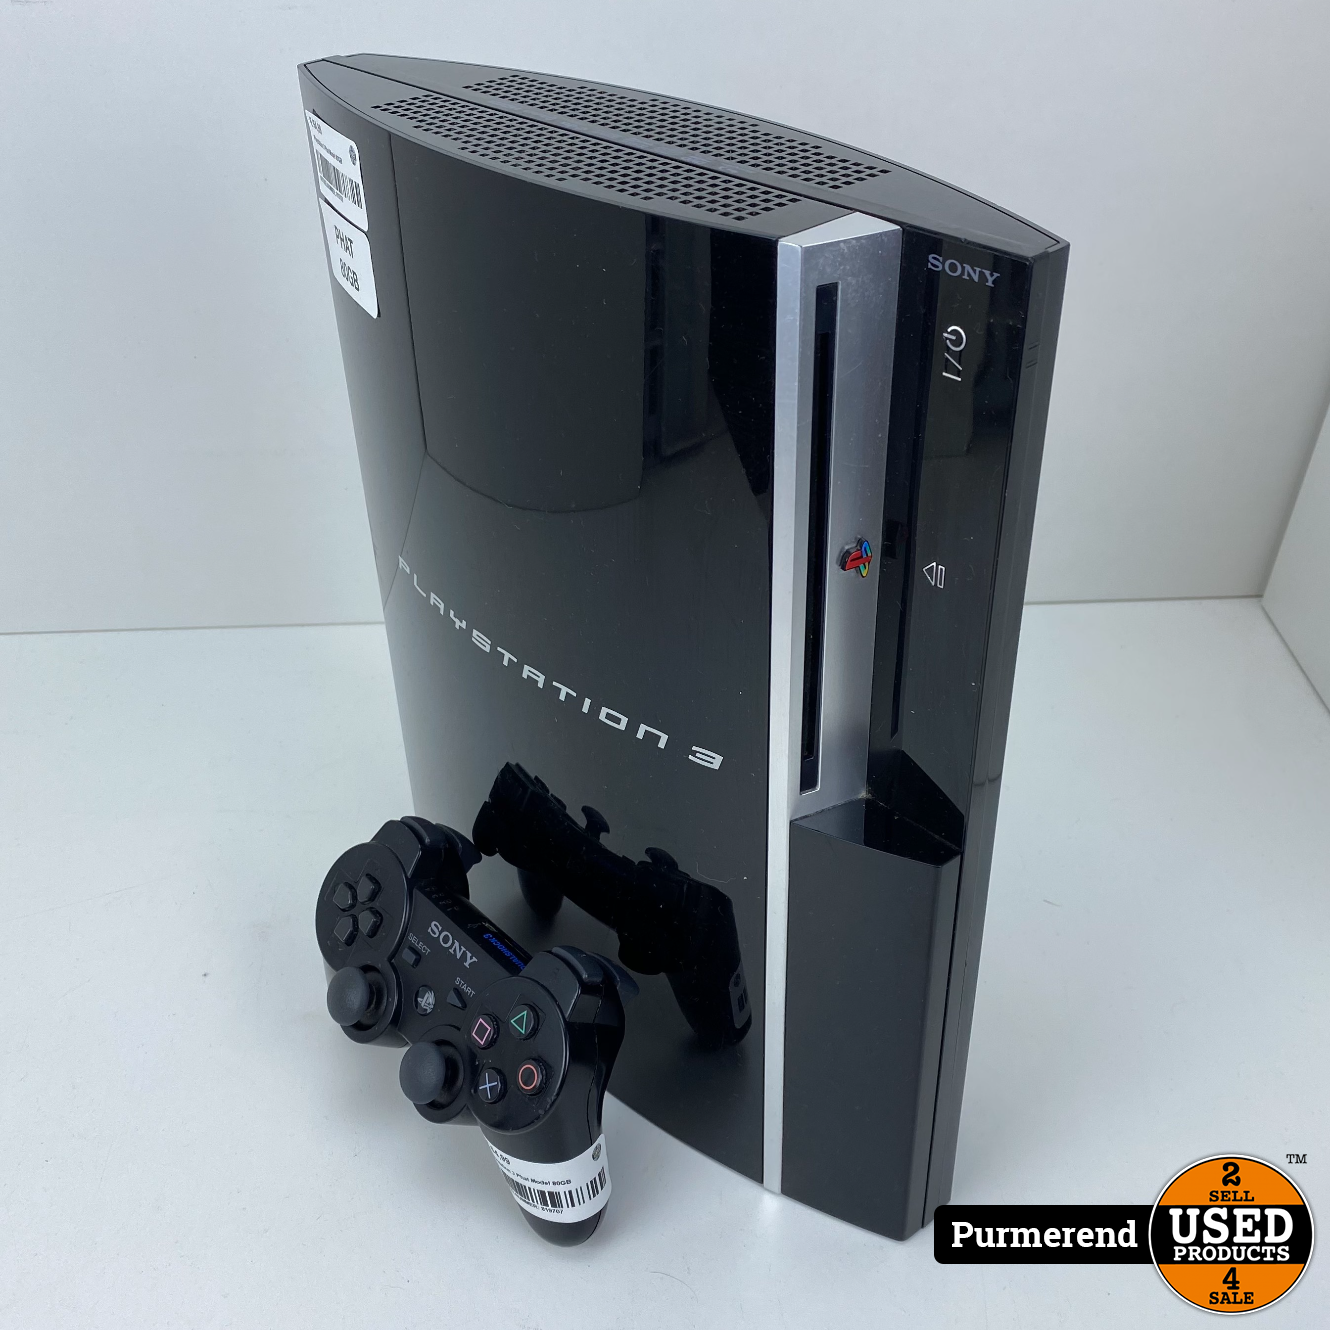 Rijp Zuiver Zuigeling Playstation 3 Phat Model 80GB - Used Products Purmerend